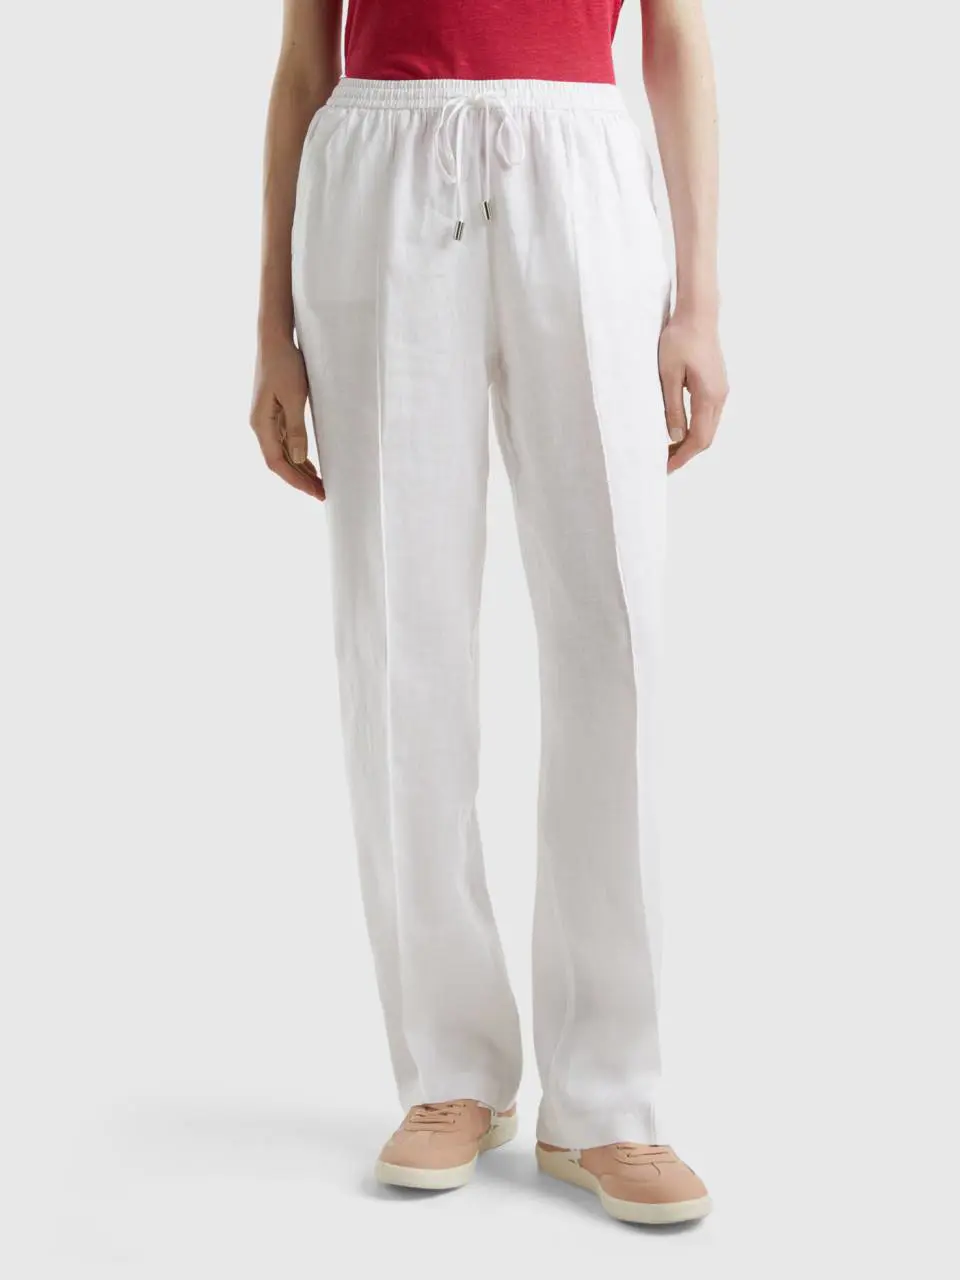 Benetton trousers in pure linen with elastic. 1